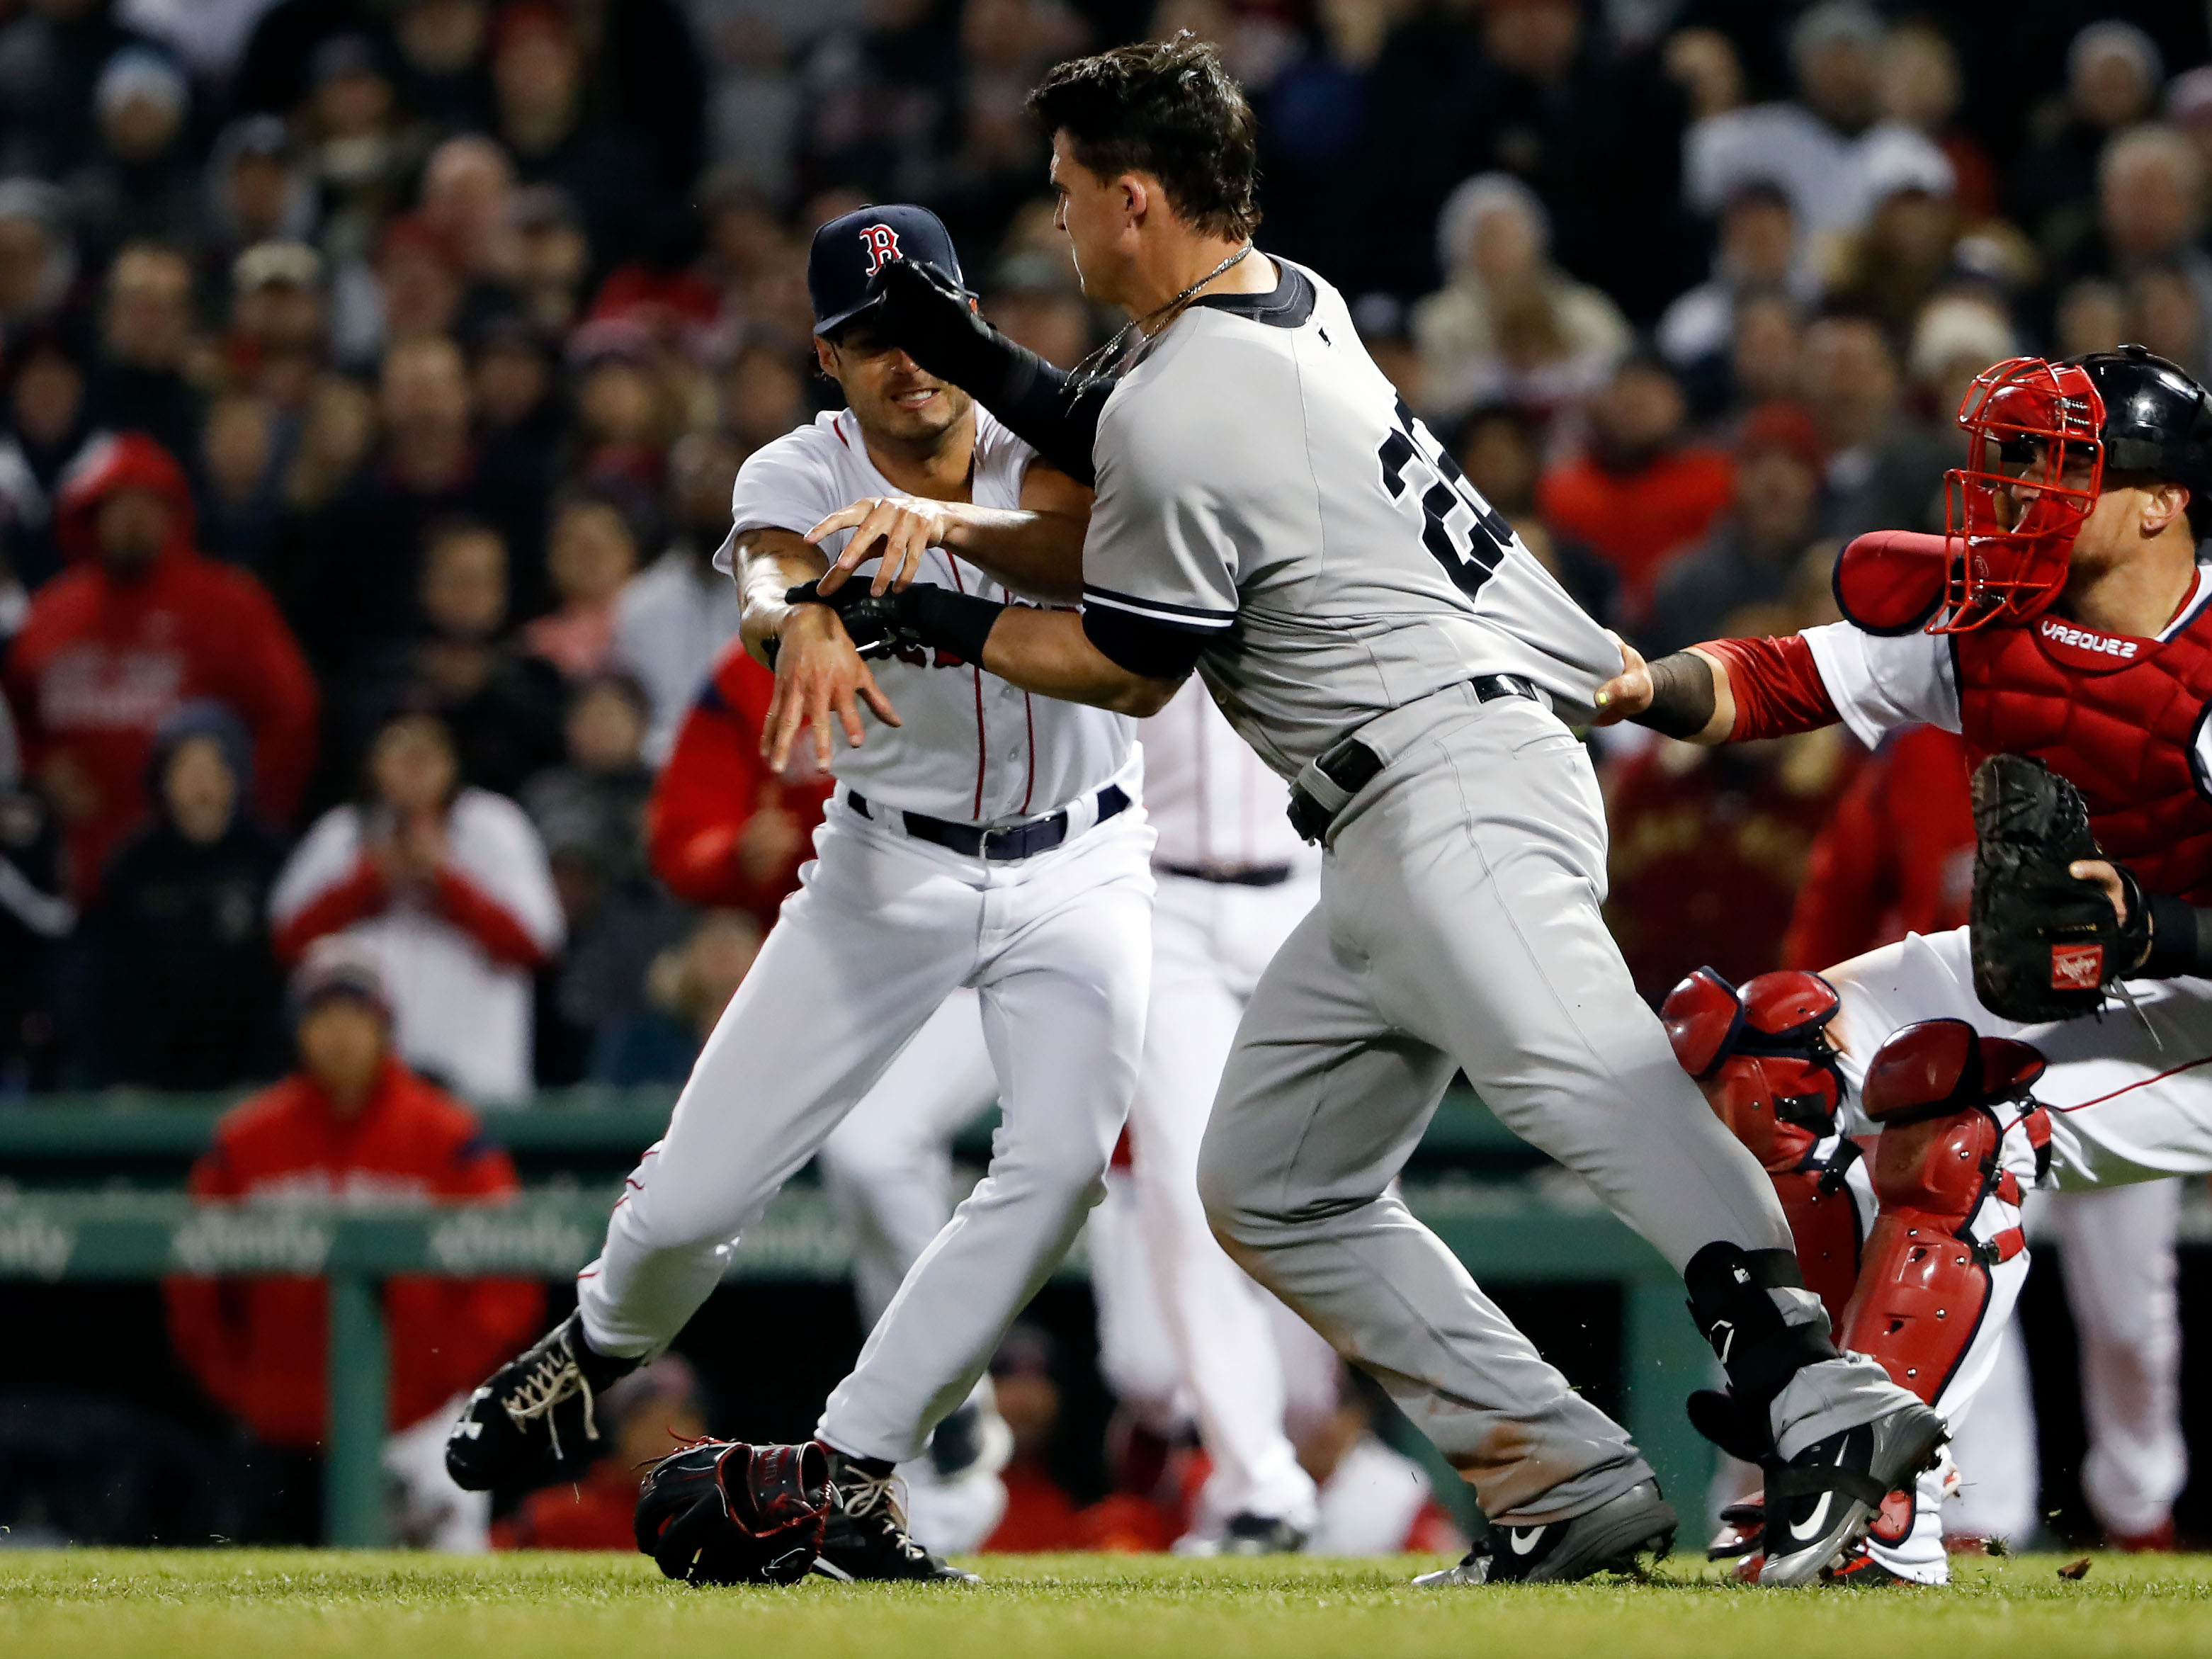 11 photos and videos from the Yankees and Red Sox brawl